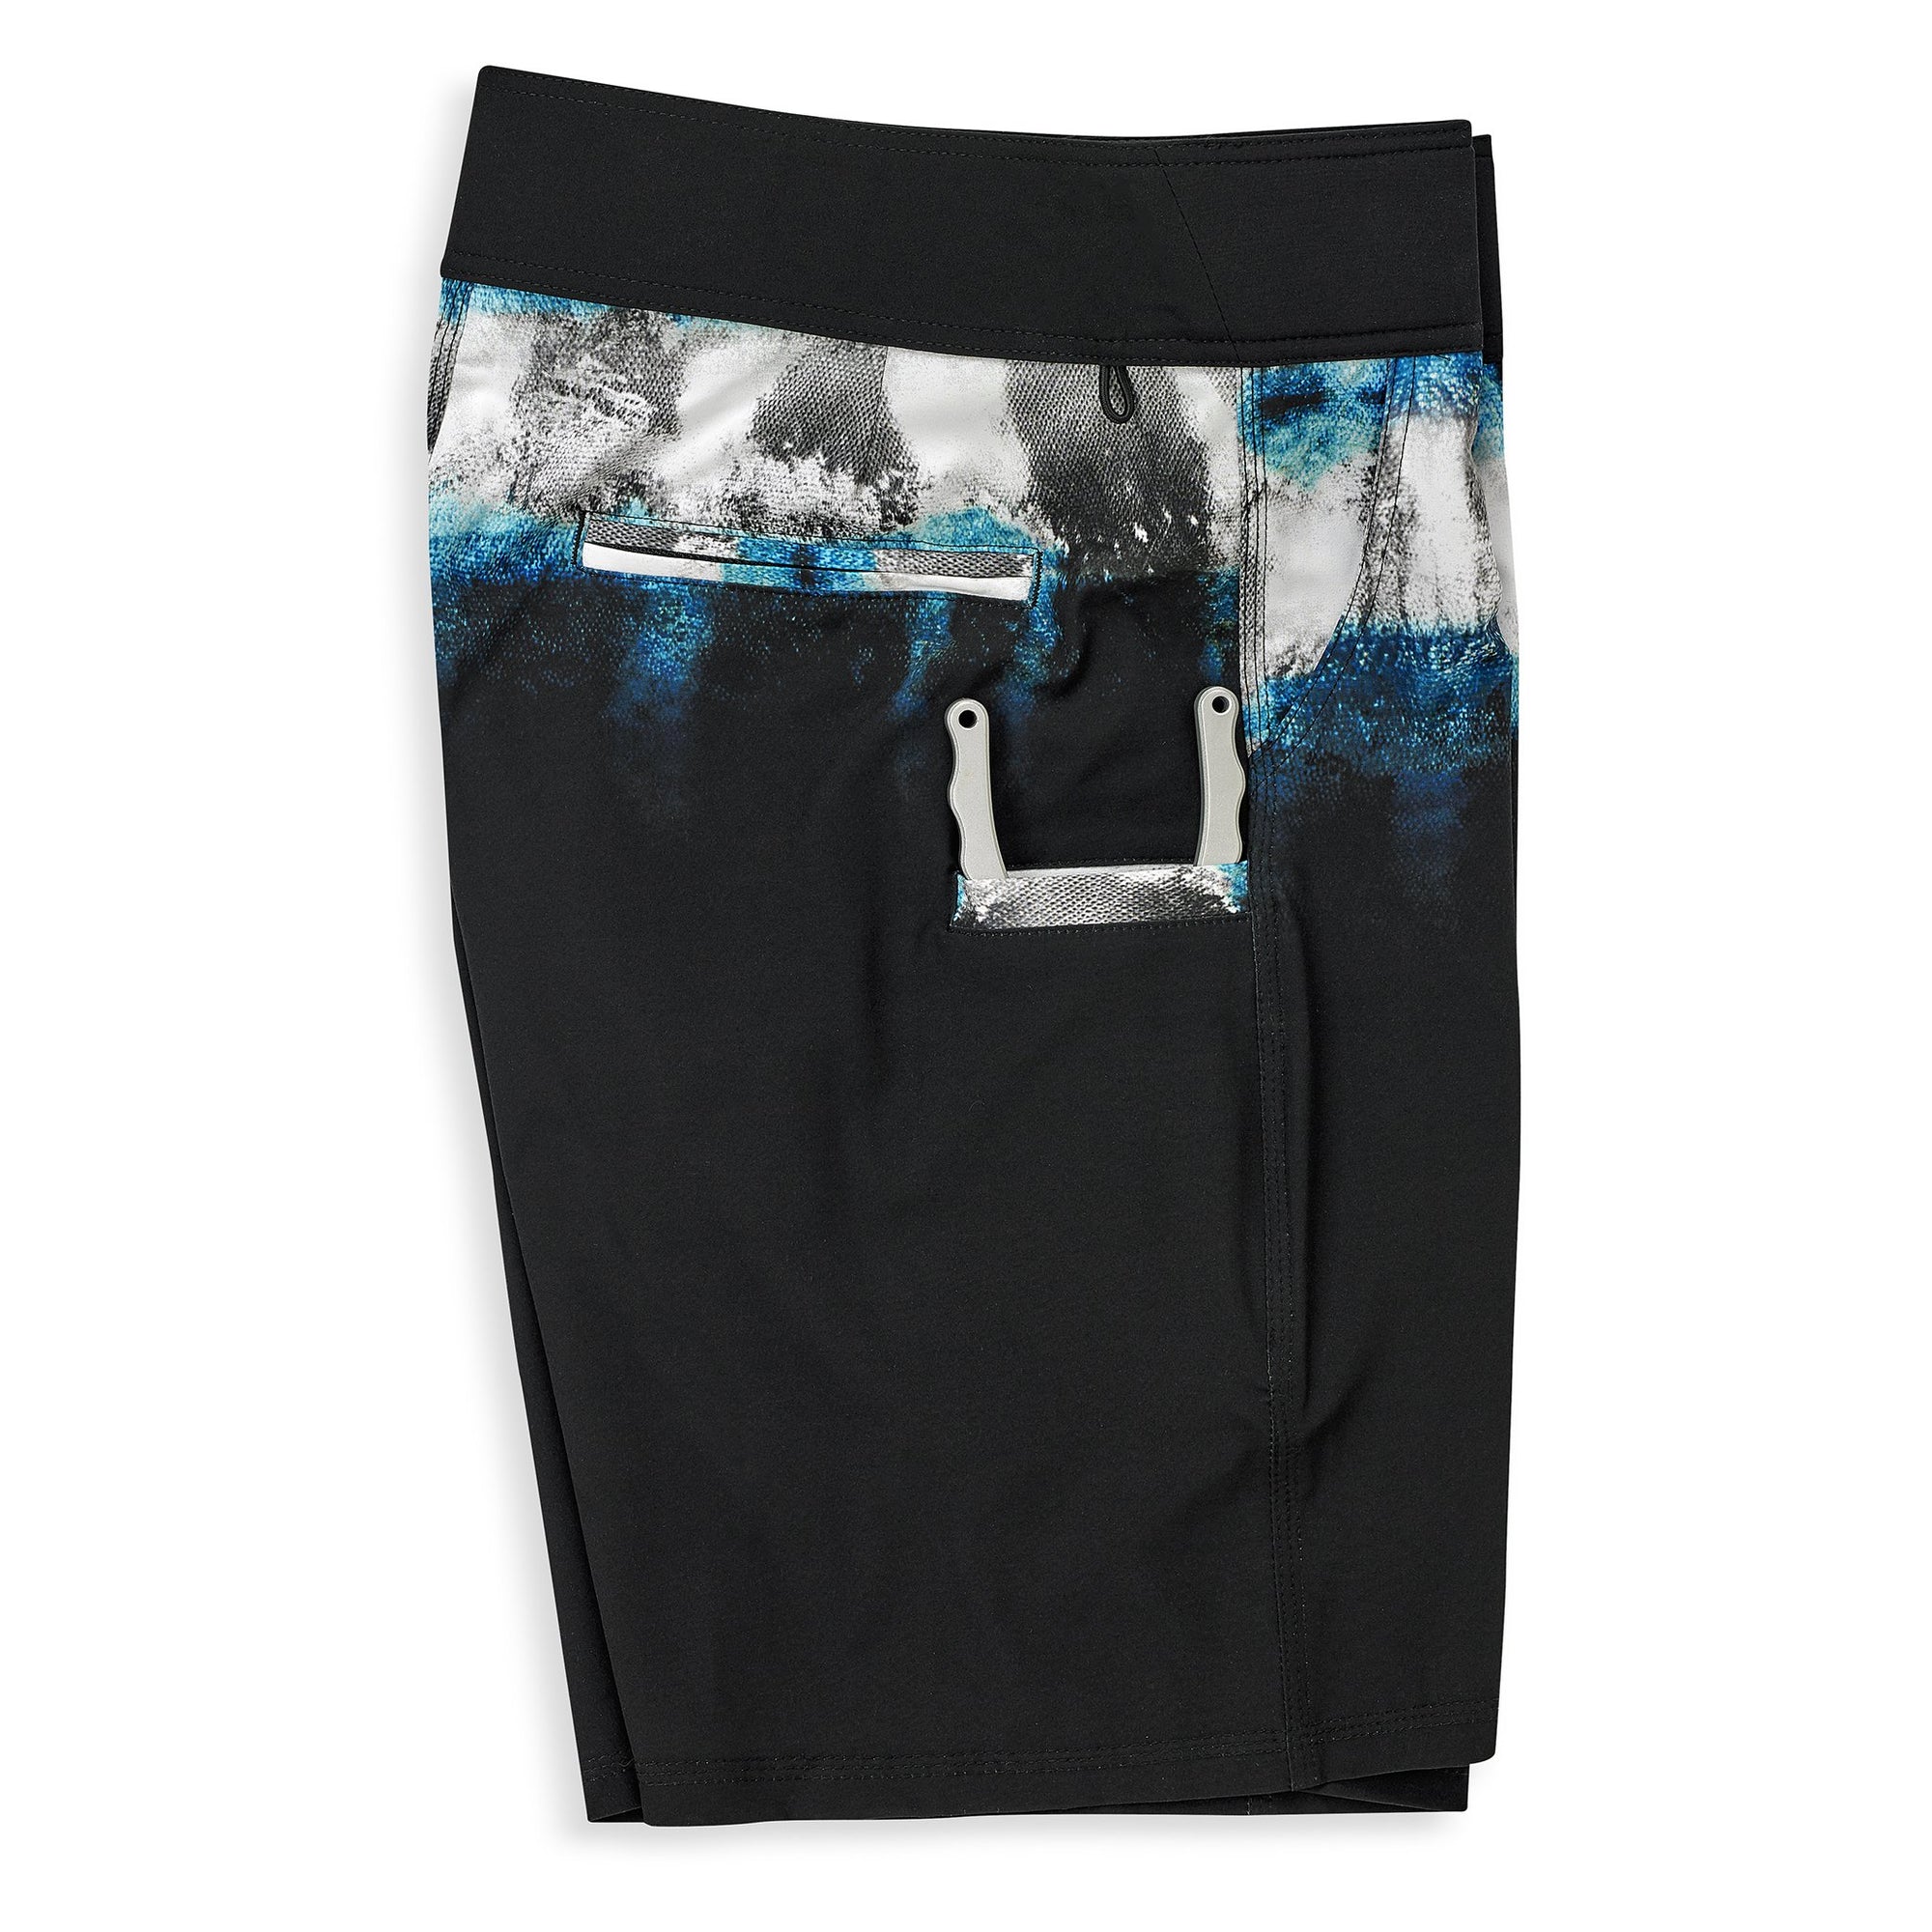 Scales Gear First Mates Boardshorts Hoo Stripes Black - Side View